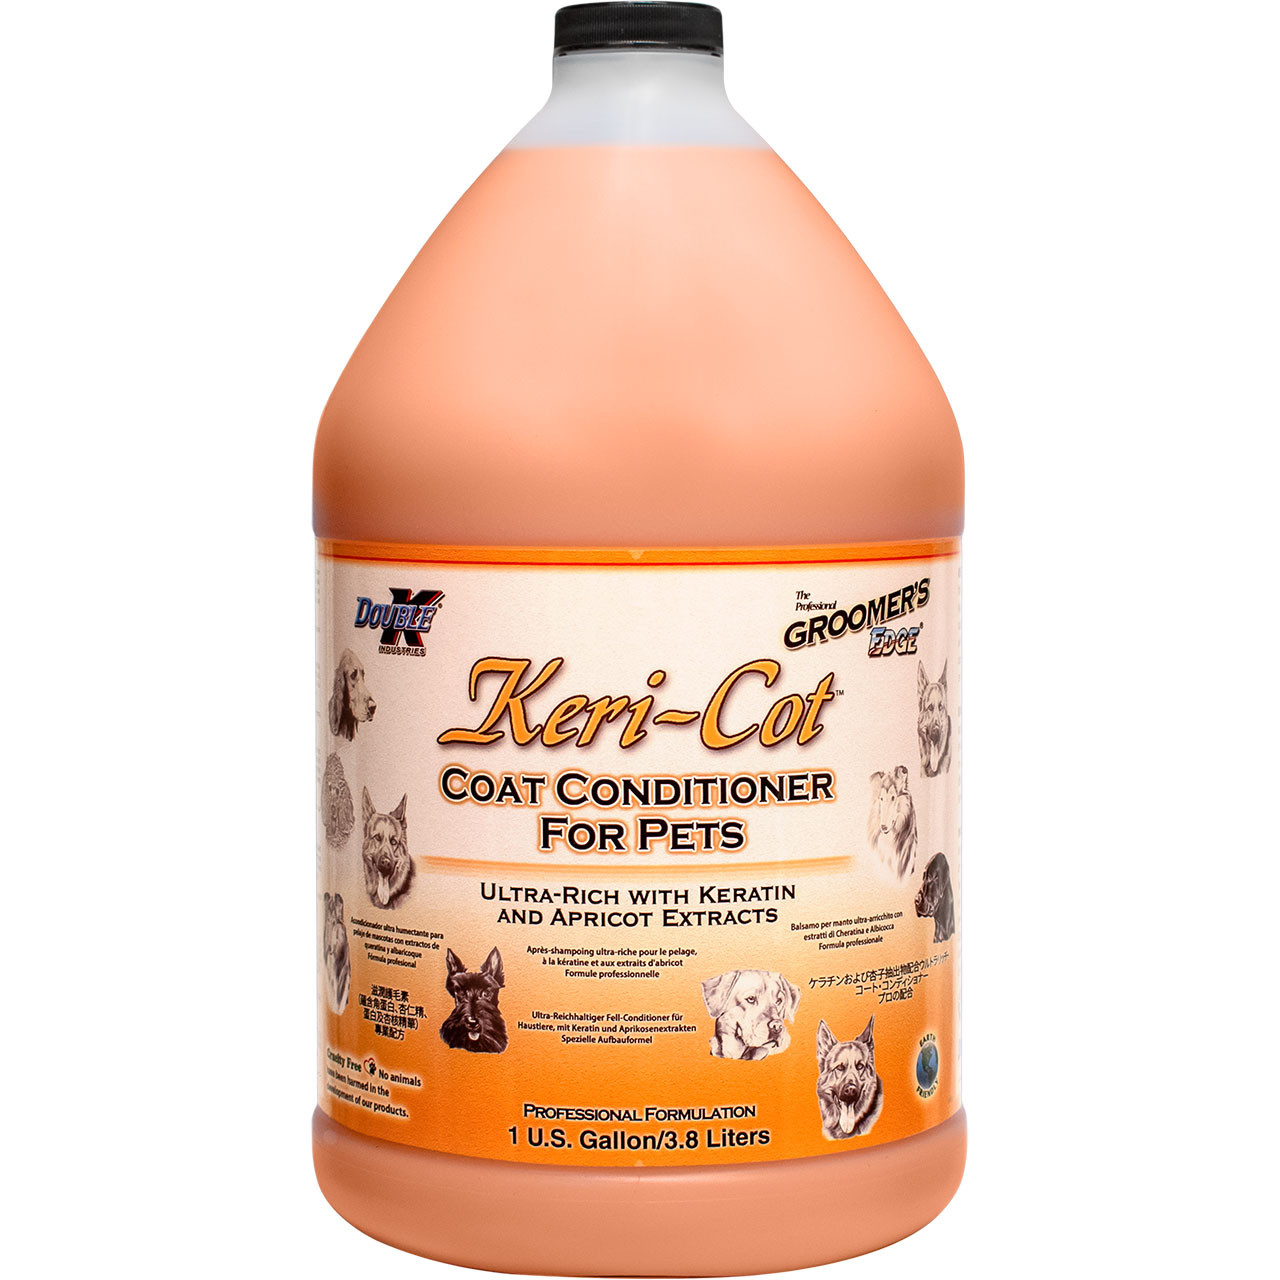 Groomer's Edge KeriCot Conditioner | Dilutes 4:1